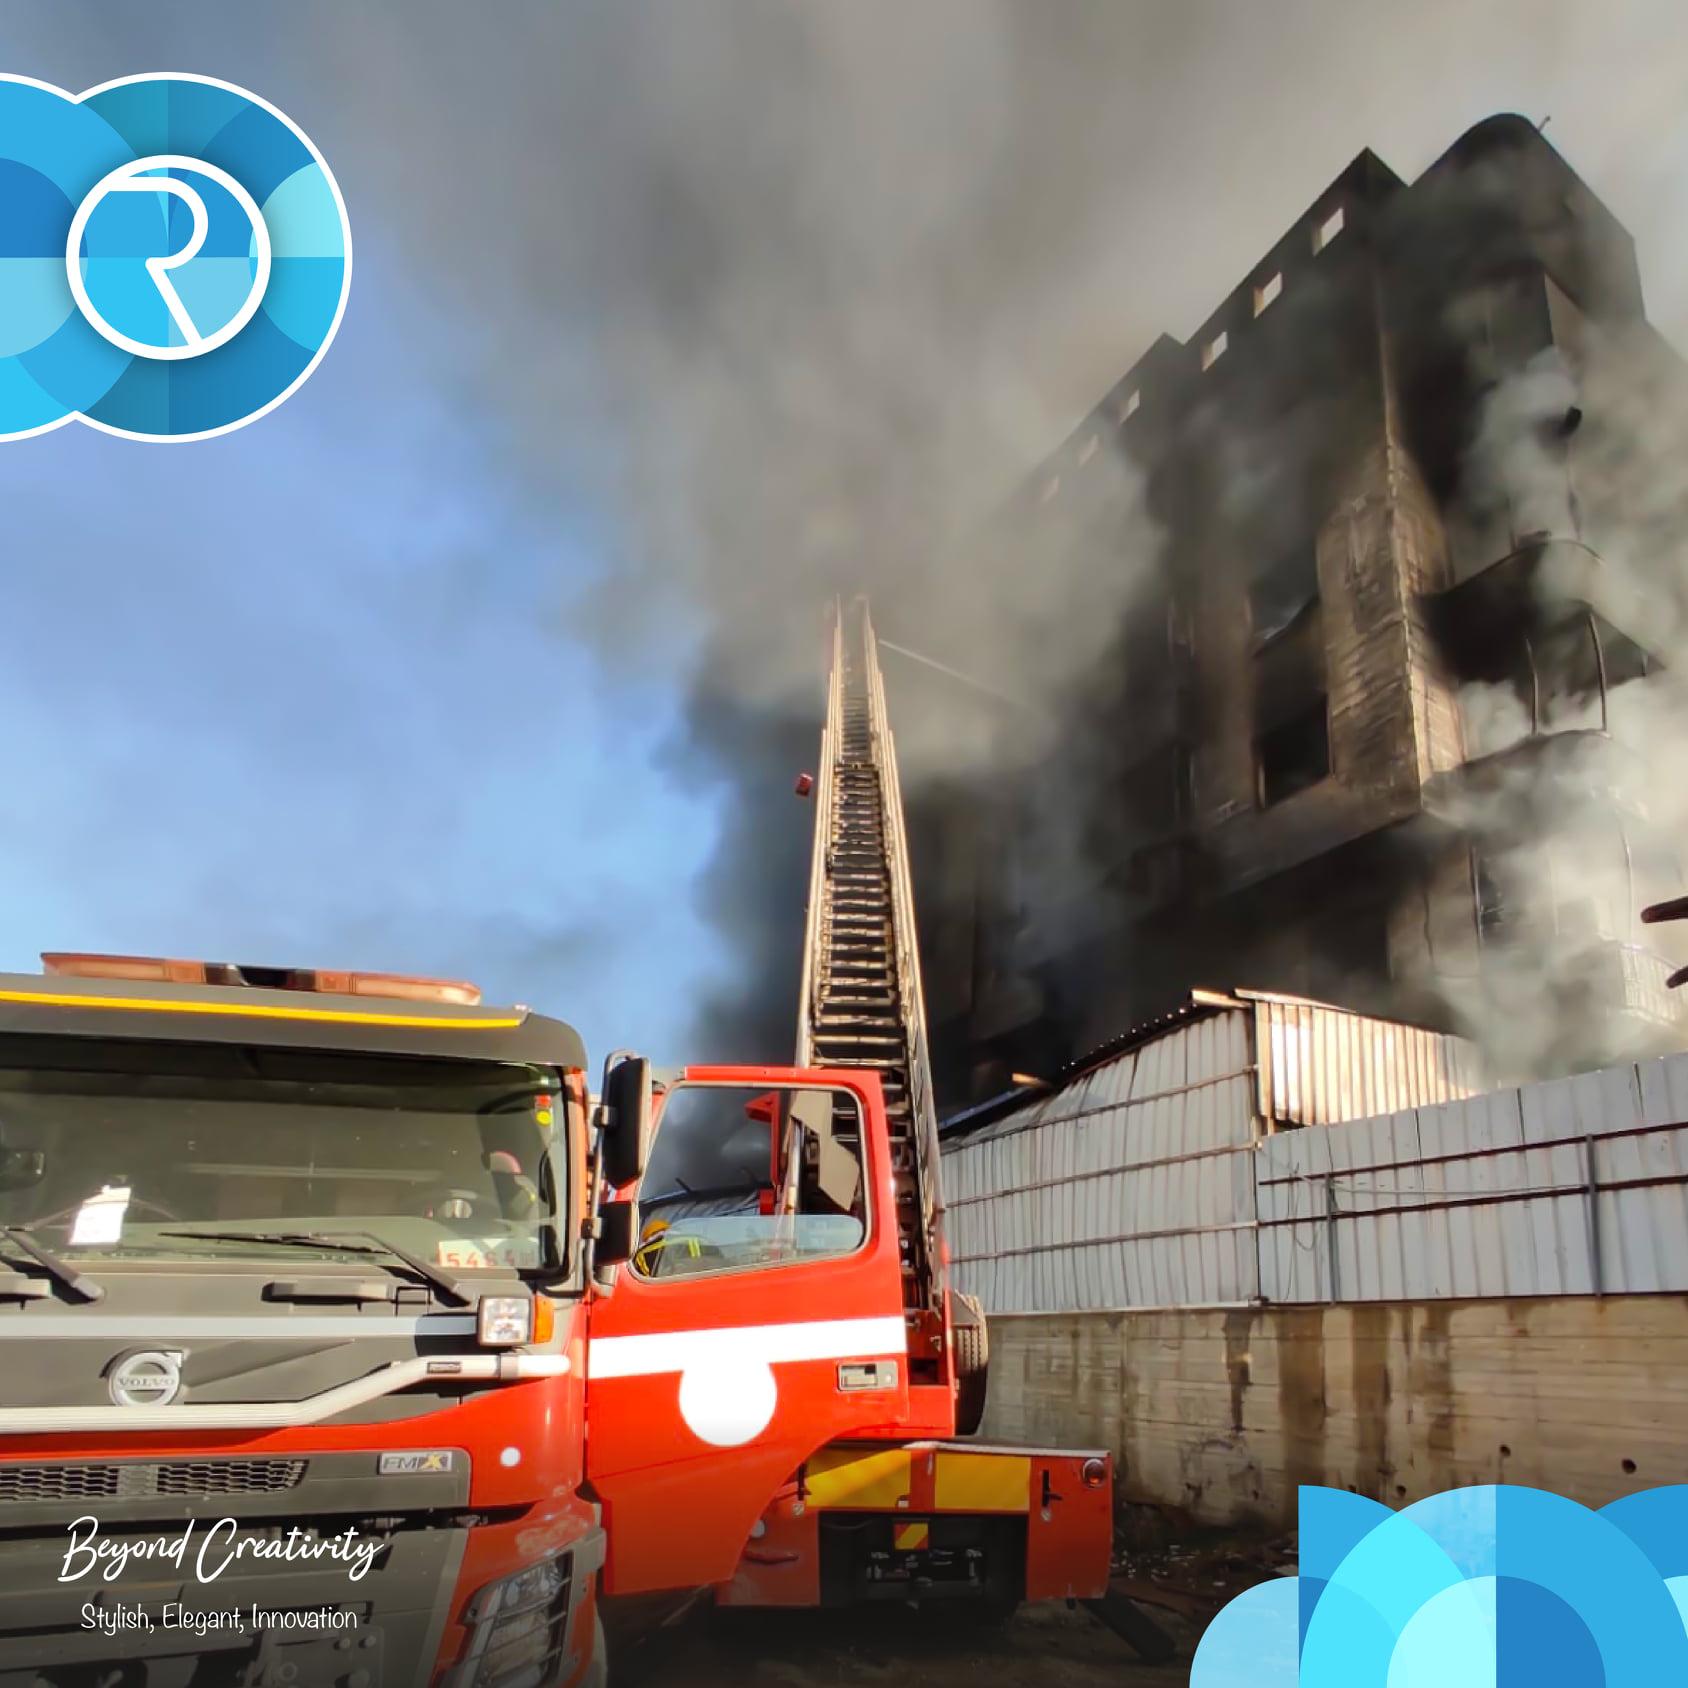 Royal participates in extinguishing a huge fire in Hebron